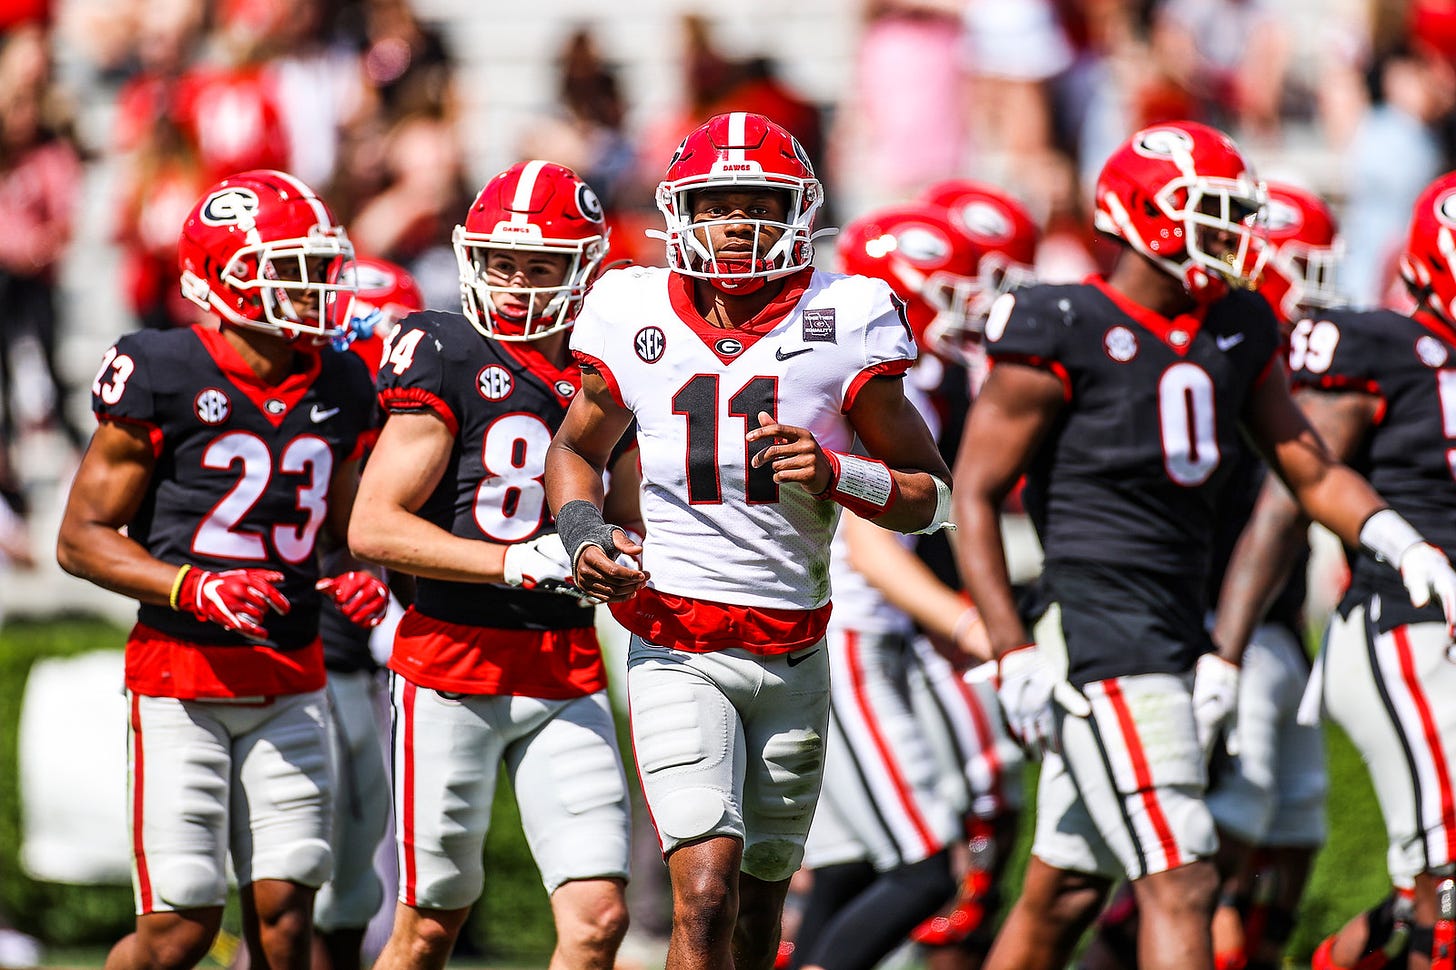 Georgia wide receiver Arian Smith (11) during the G-Day scrimmage on Dooley Field at Sanford Stadium in Athens, Ga., on Saturday, April 17, 2021. (Photo by Tony Walsh)